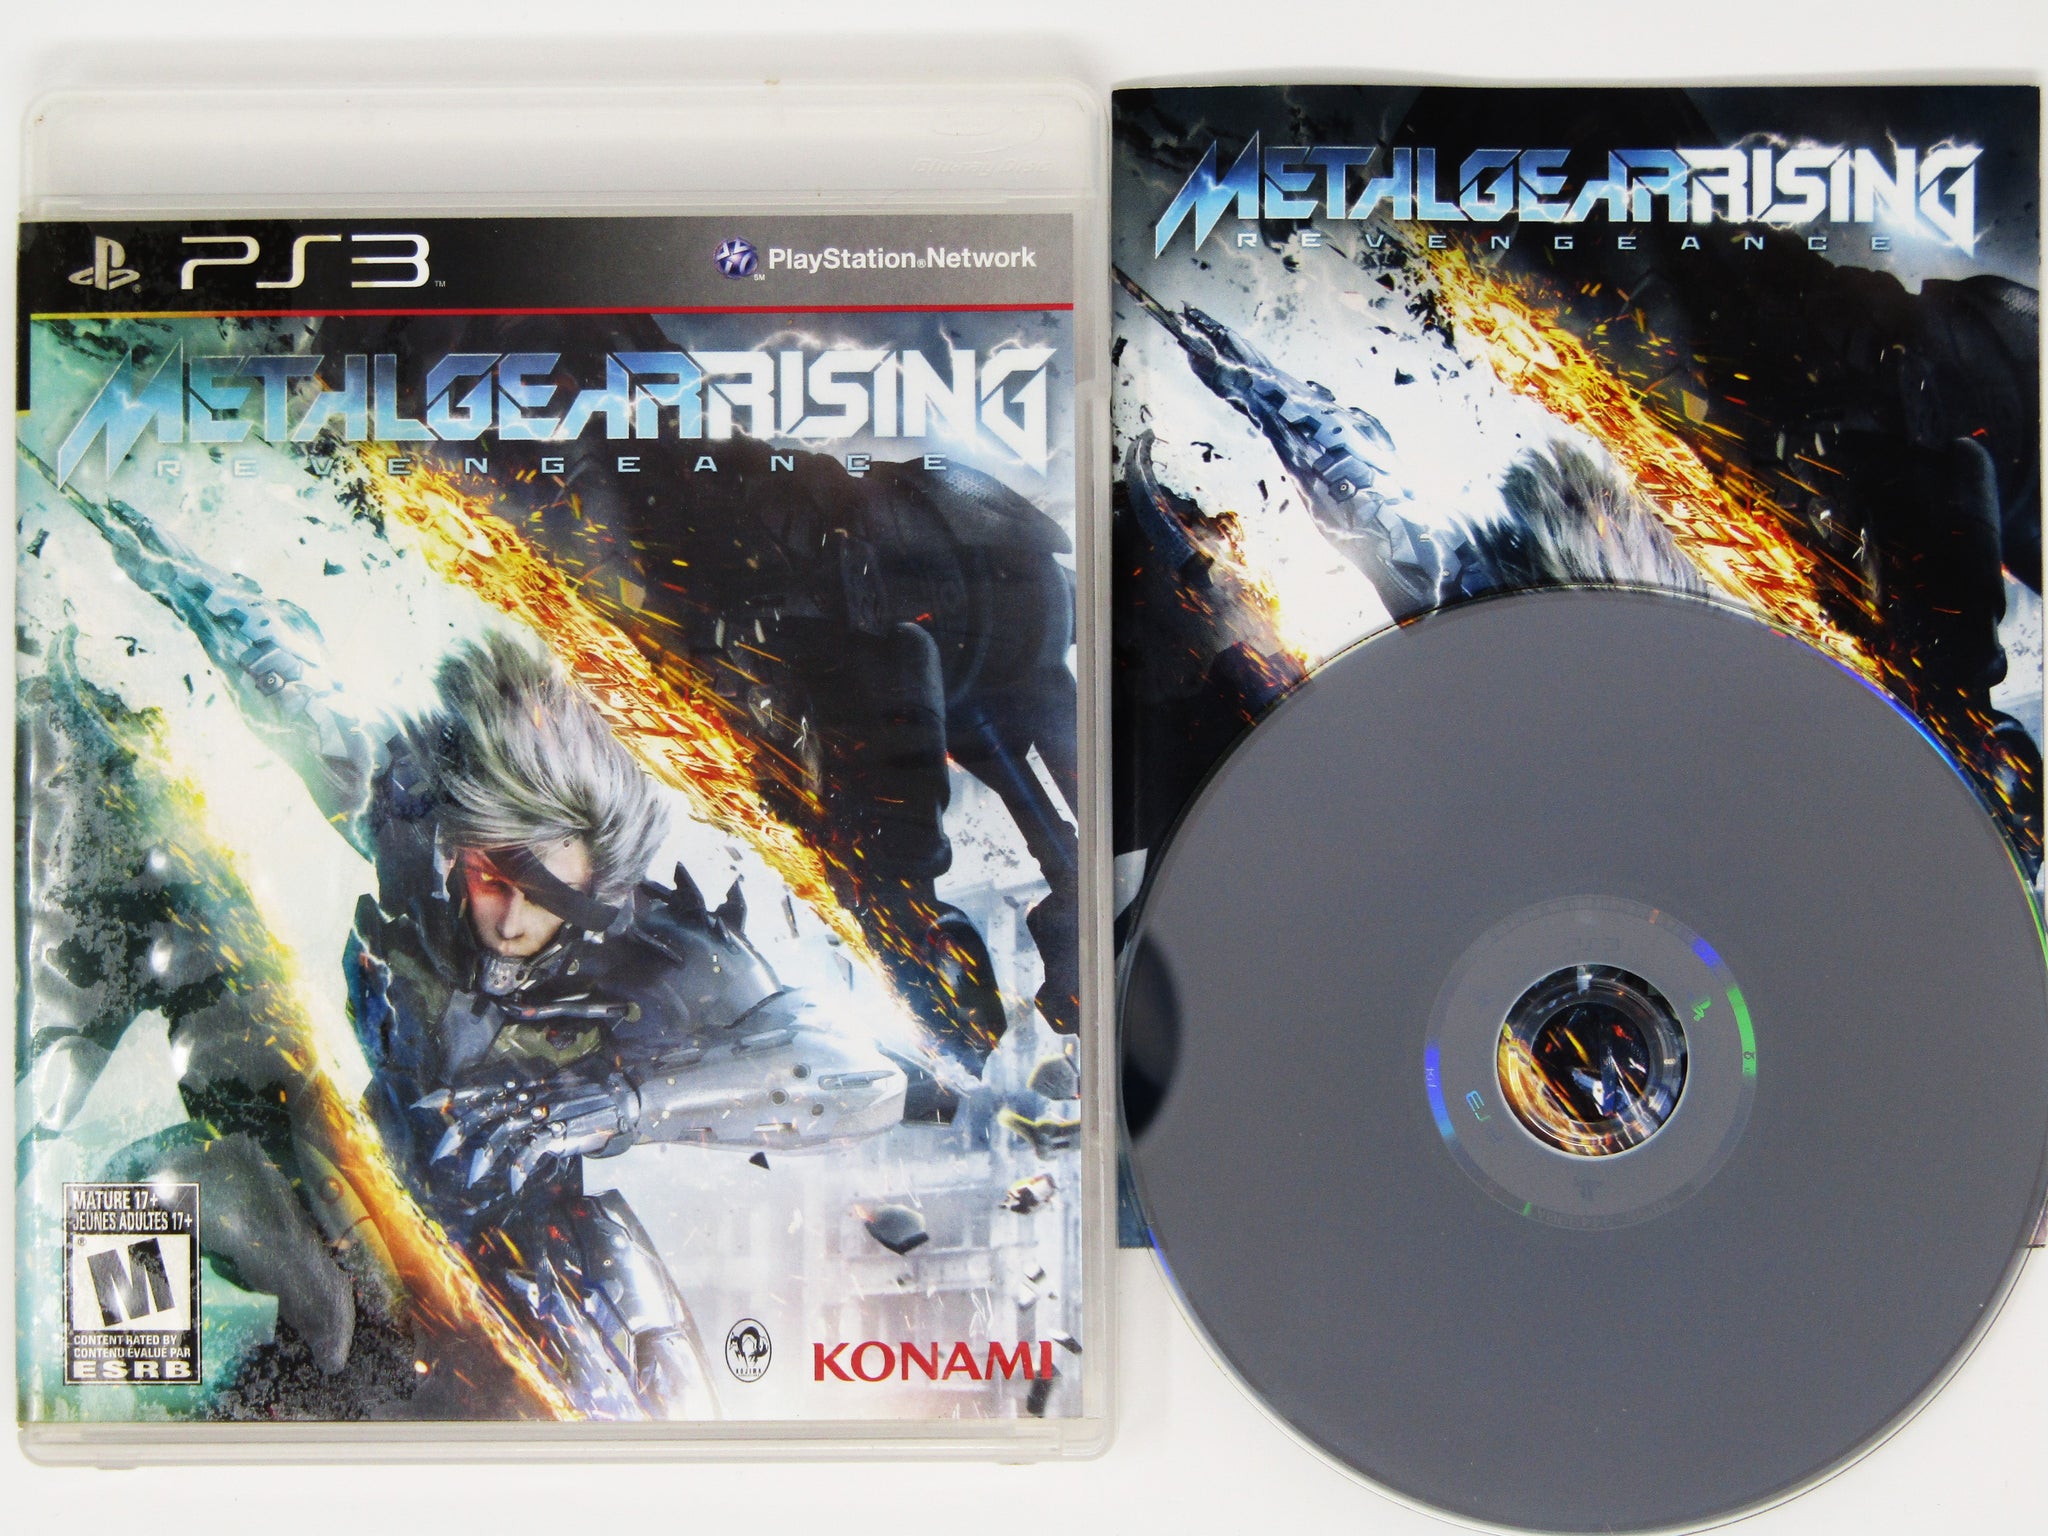 Metal Gear Rising: Revengeance - PS3 - Brand New, Factory Sealed